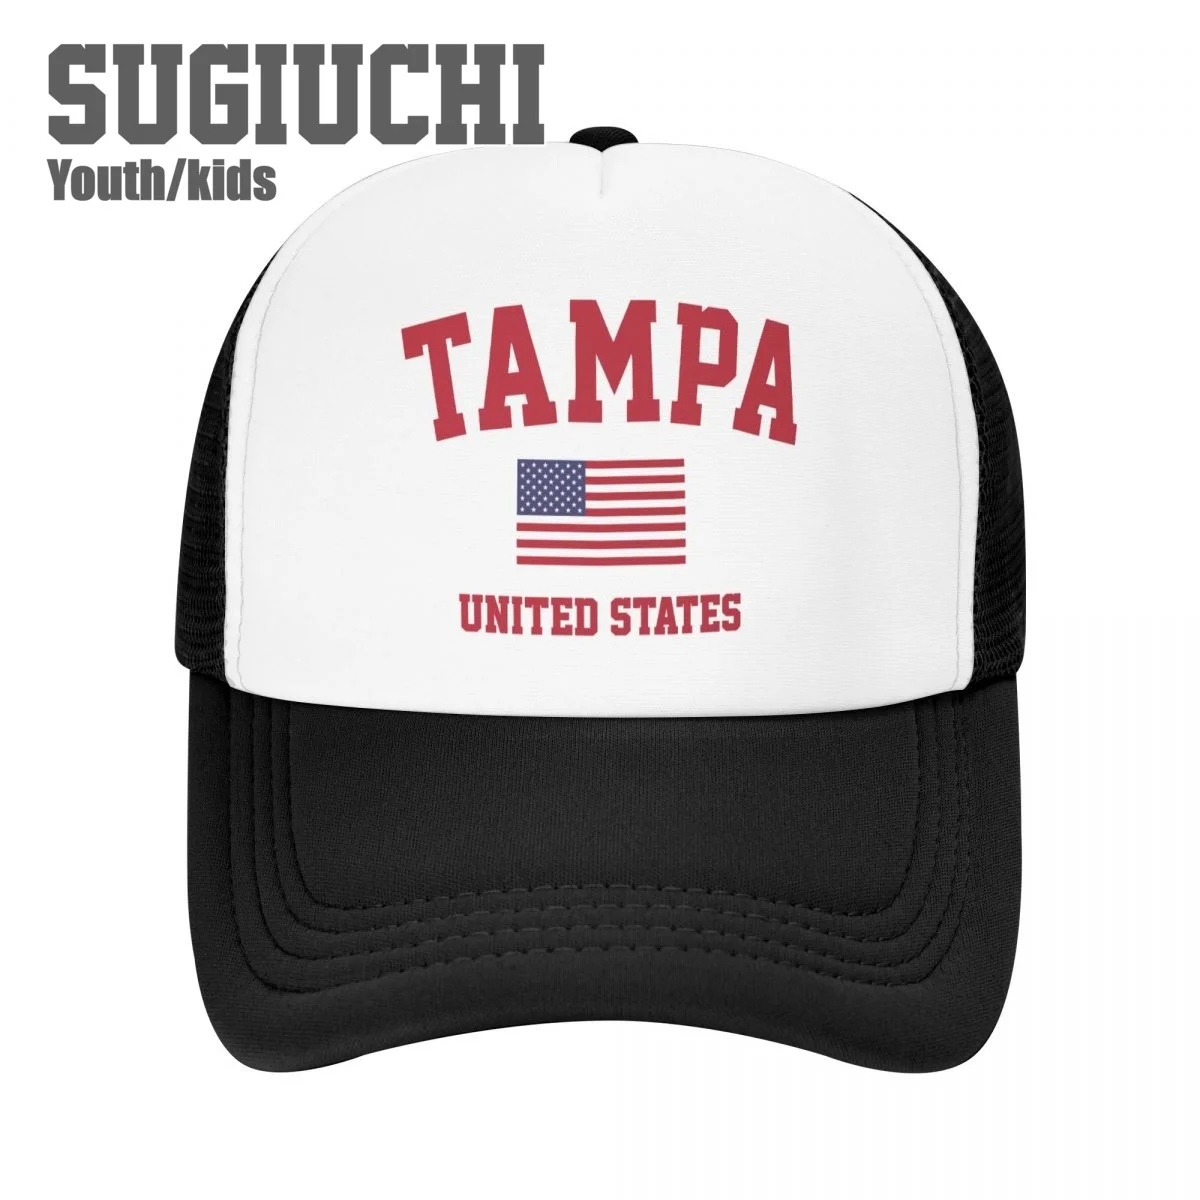 

Kids Mesh Cap Hat Tampa Of USA United States City Baseball Caps for Youth Boys Girls Pupil Children's Hats Outdoor Sports Unisex